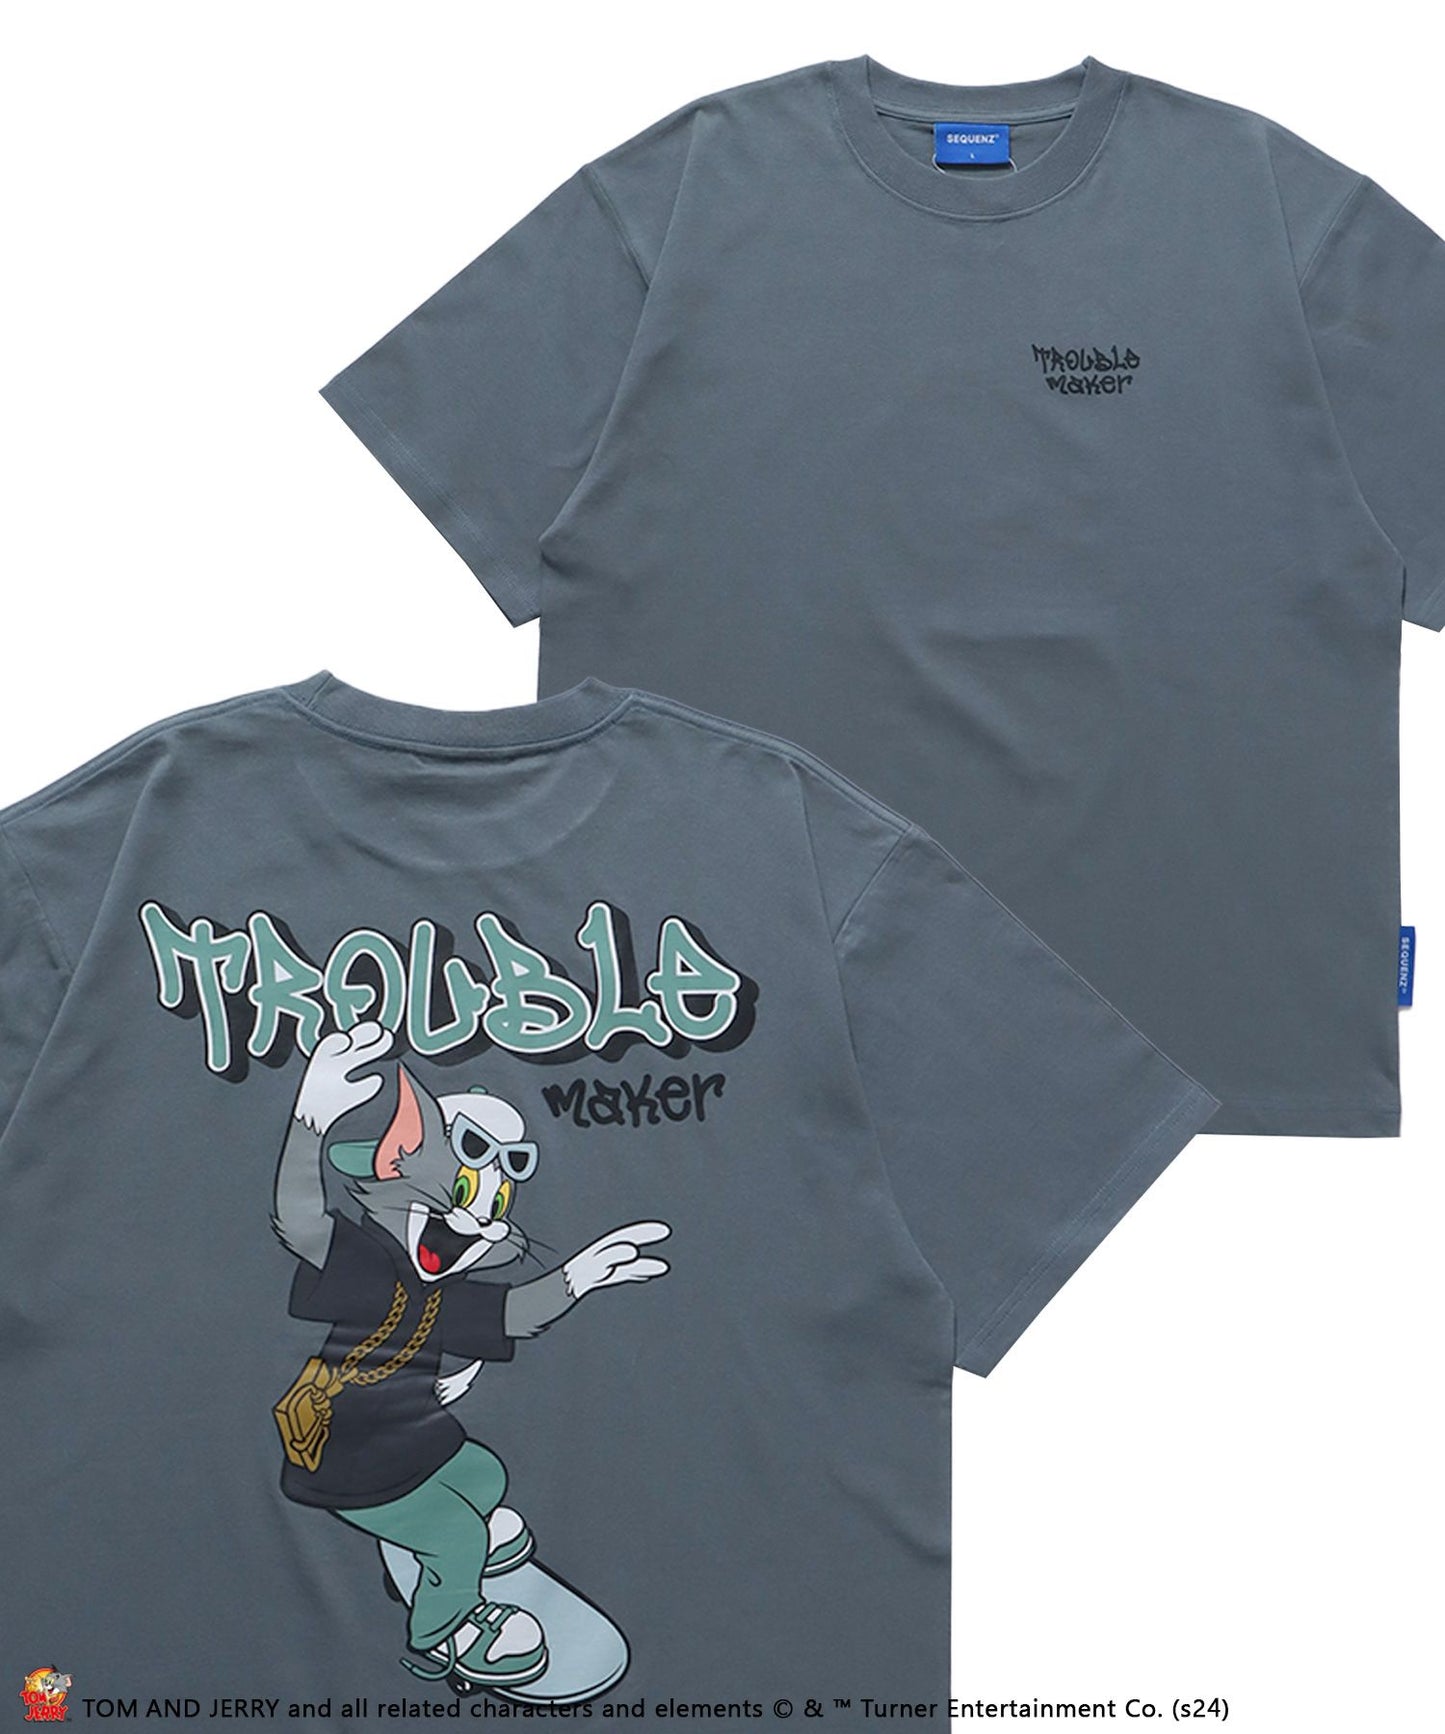 【SEQUENZ（シークエンズ）】TJ 90s SK8 S/S TEE / TOM and JERRY トムジェリ スケート Tシャツ グラフィティ プリント 半袖 ブルー